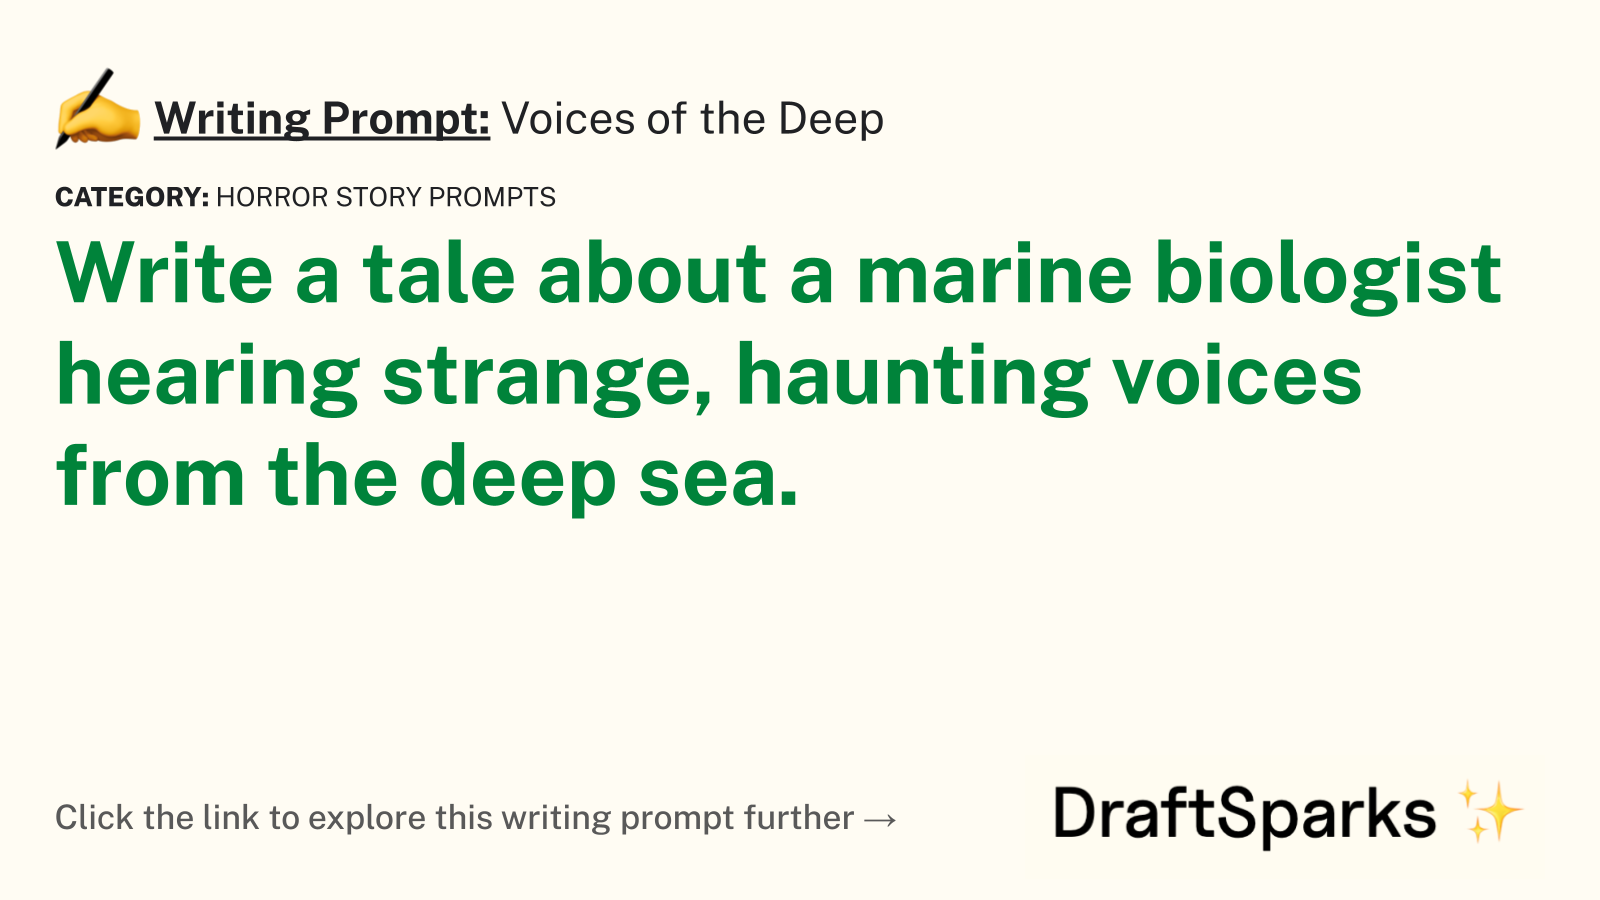 Voices of the Deep